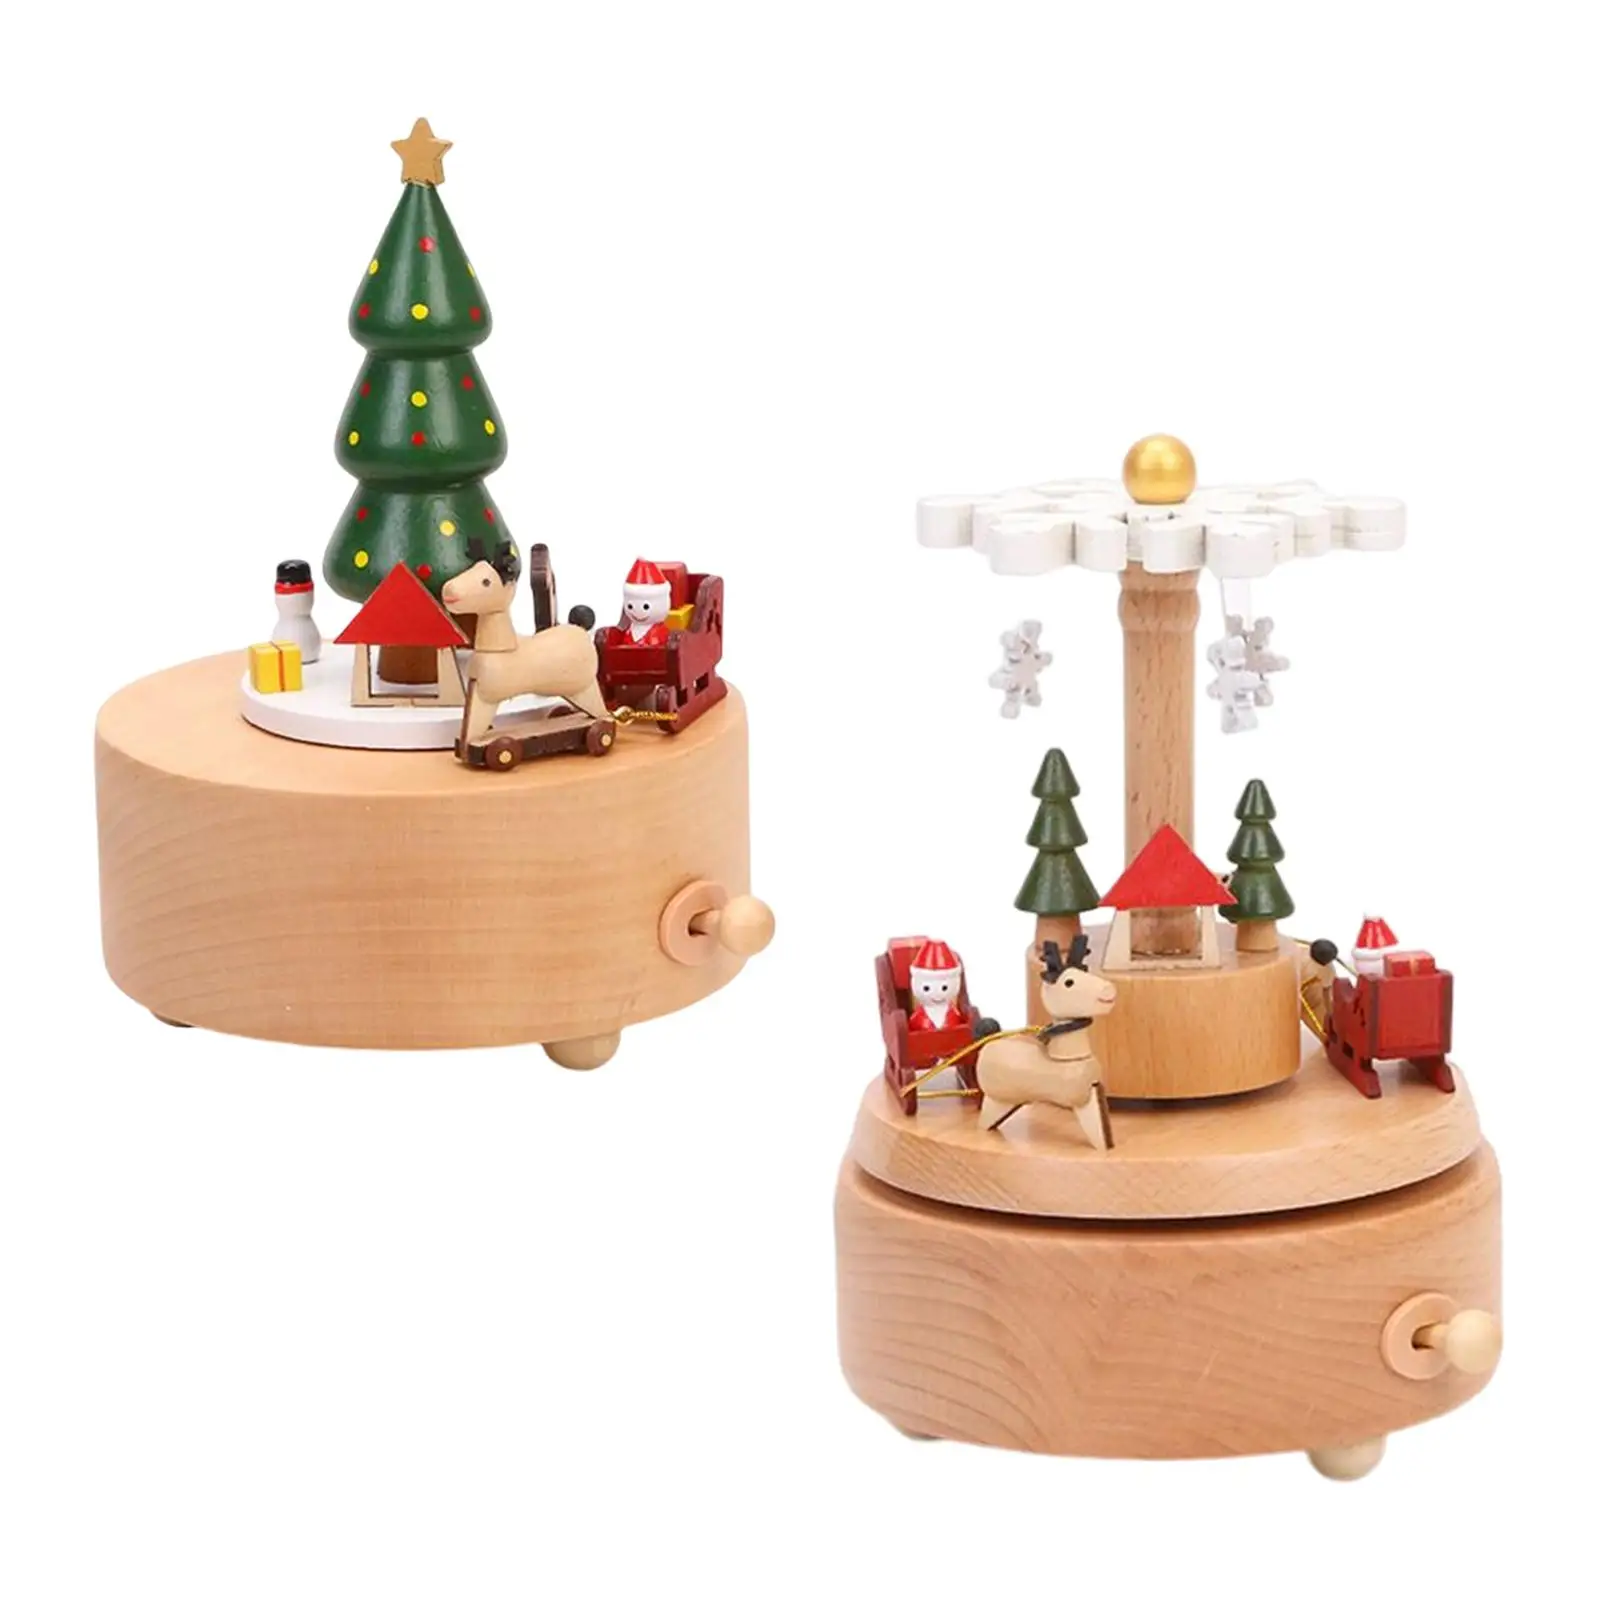 Creative Christmas Music Box Rotatable Wood Musical Box Carousel Toy Crafts for Desktop Holiday Home Decor Kids Girls Gift